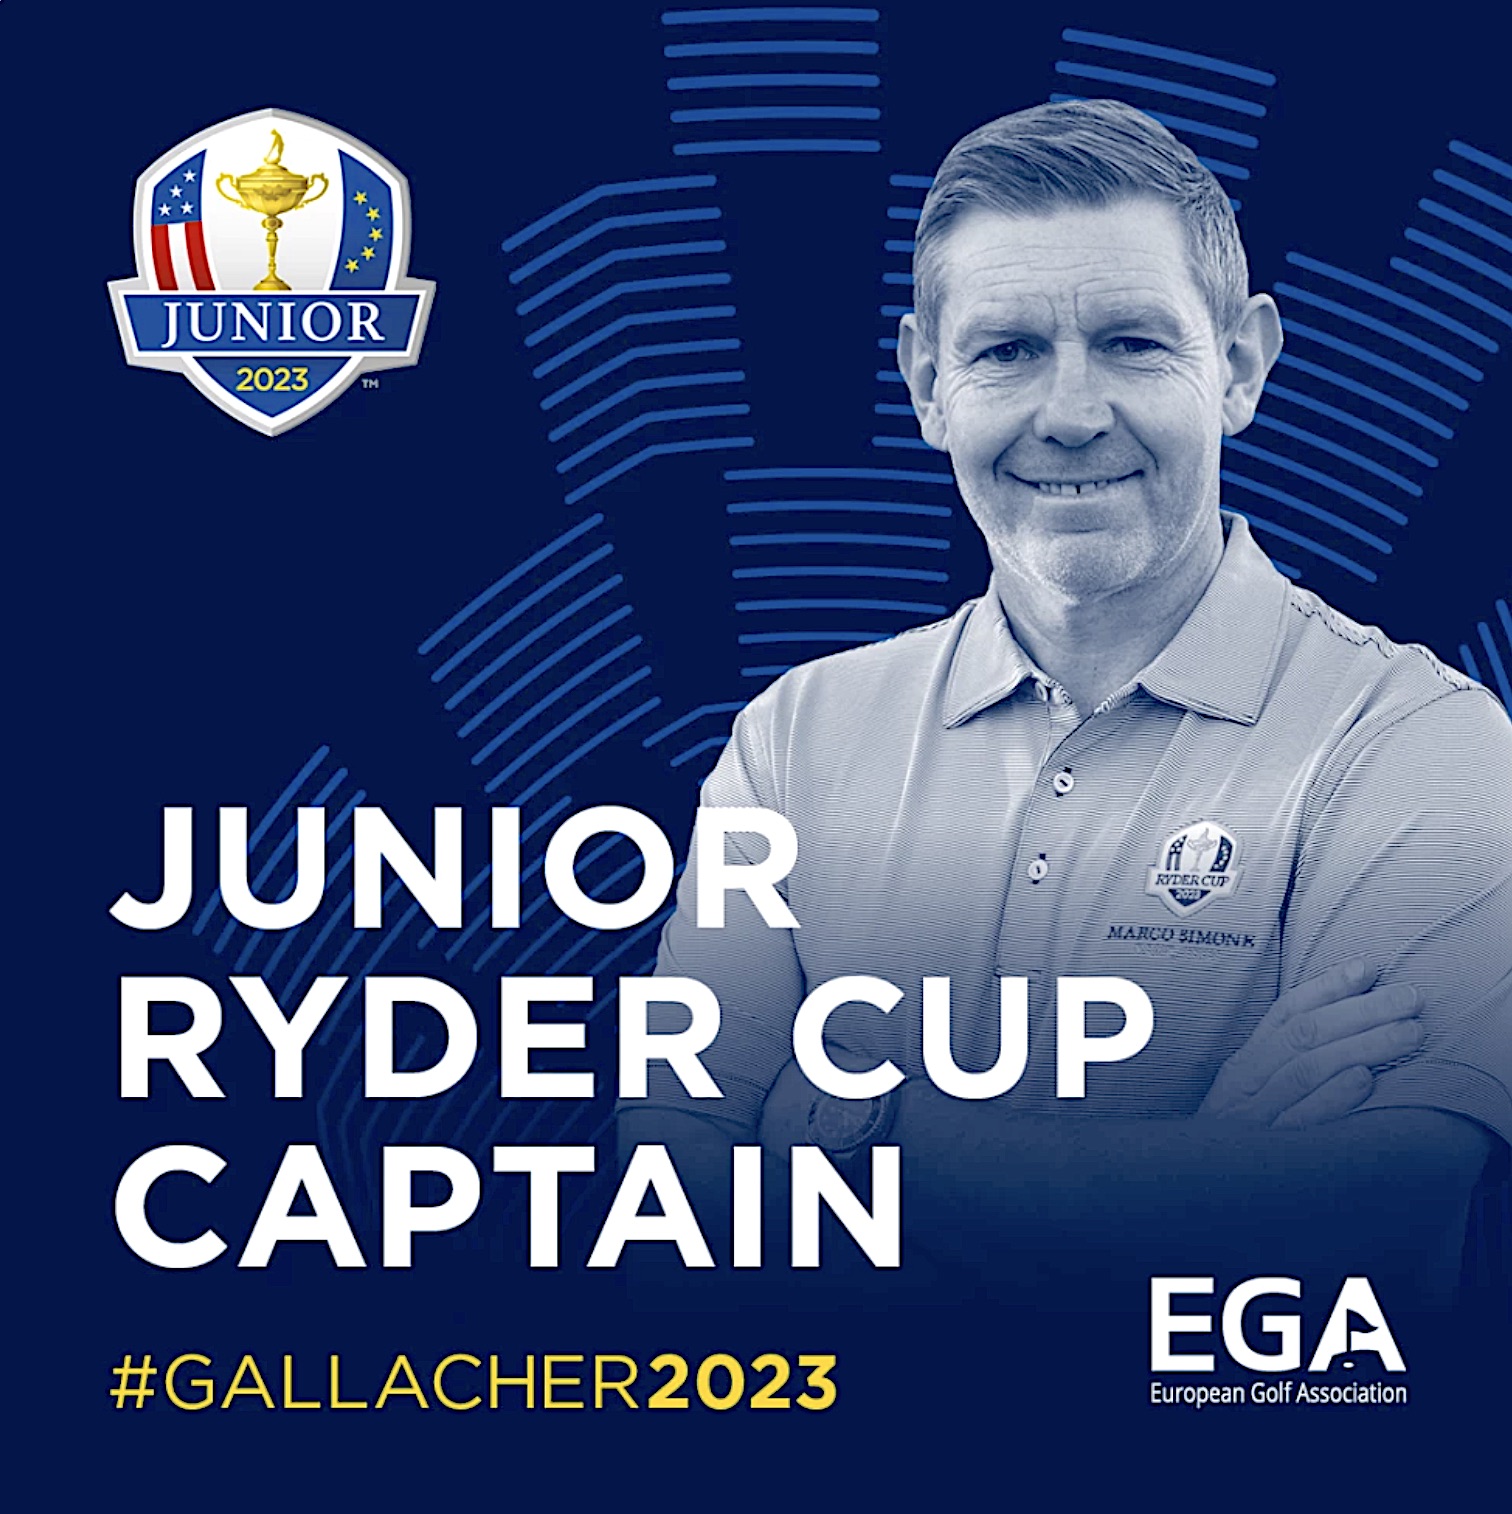 Stephen Gallacher the 2023 Europe Junior Ryder Cup captain